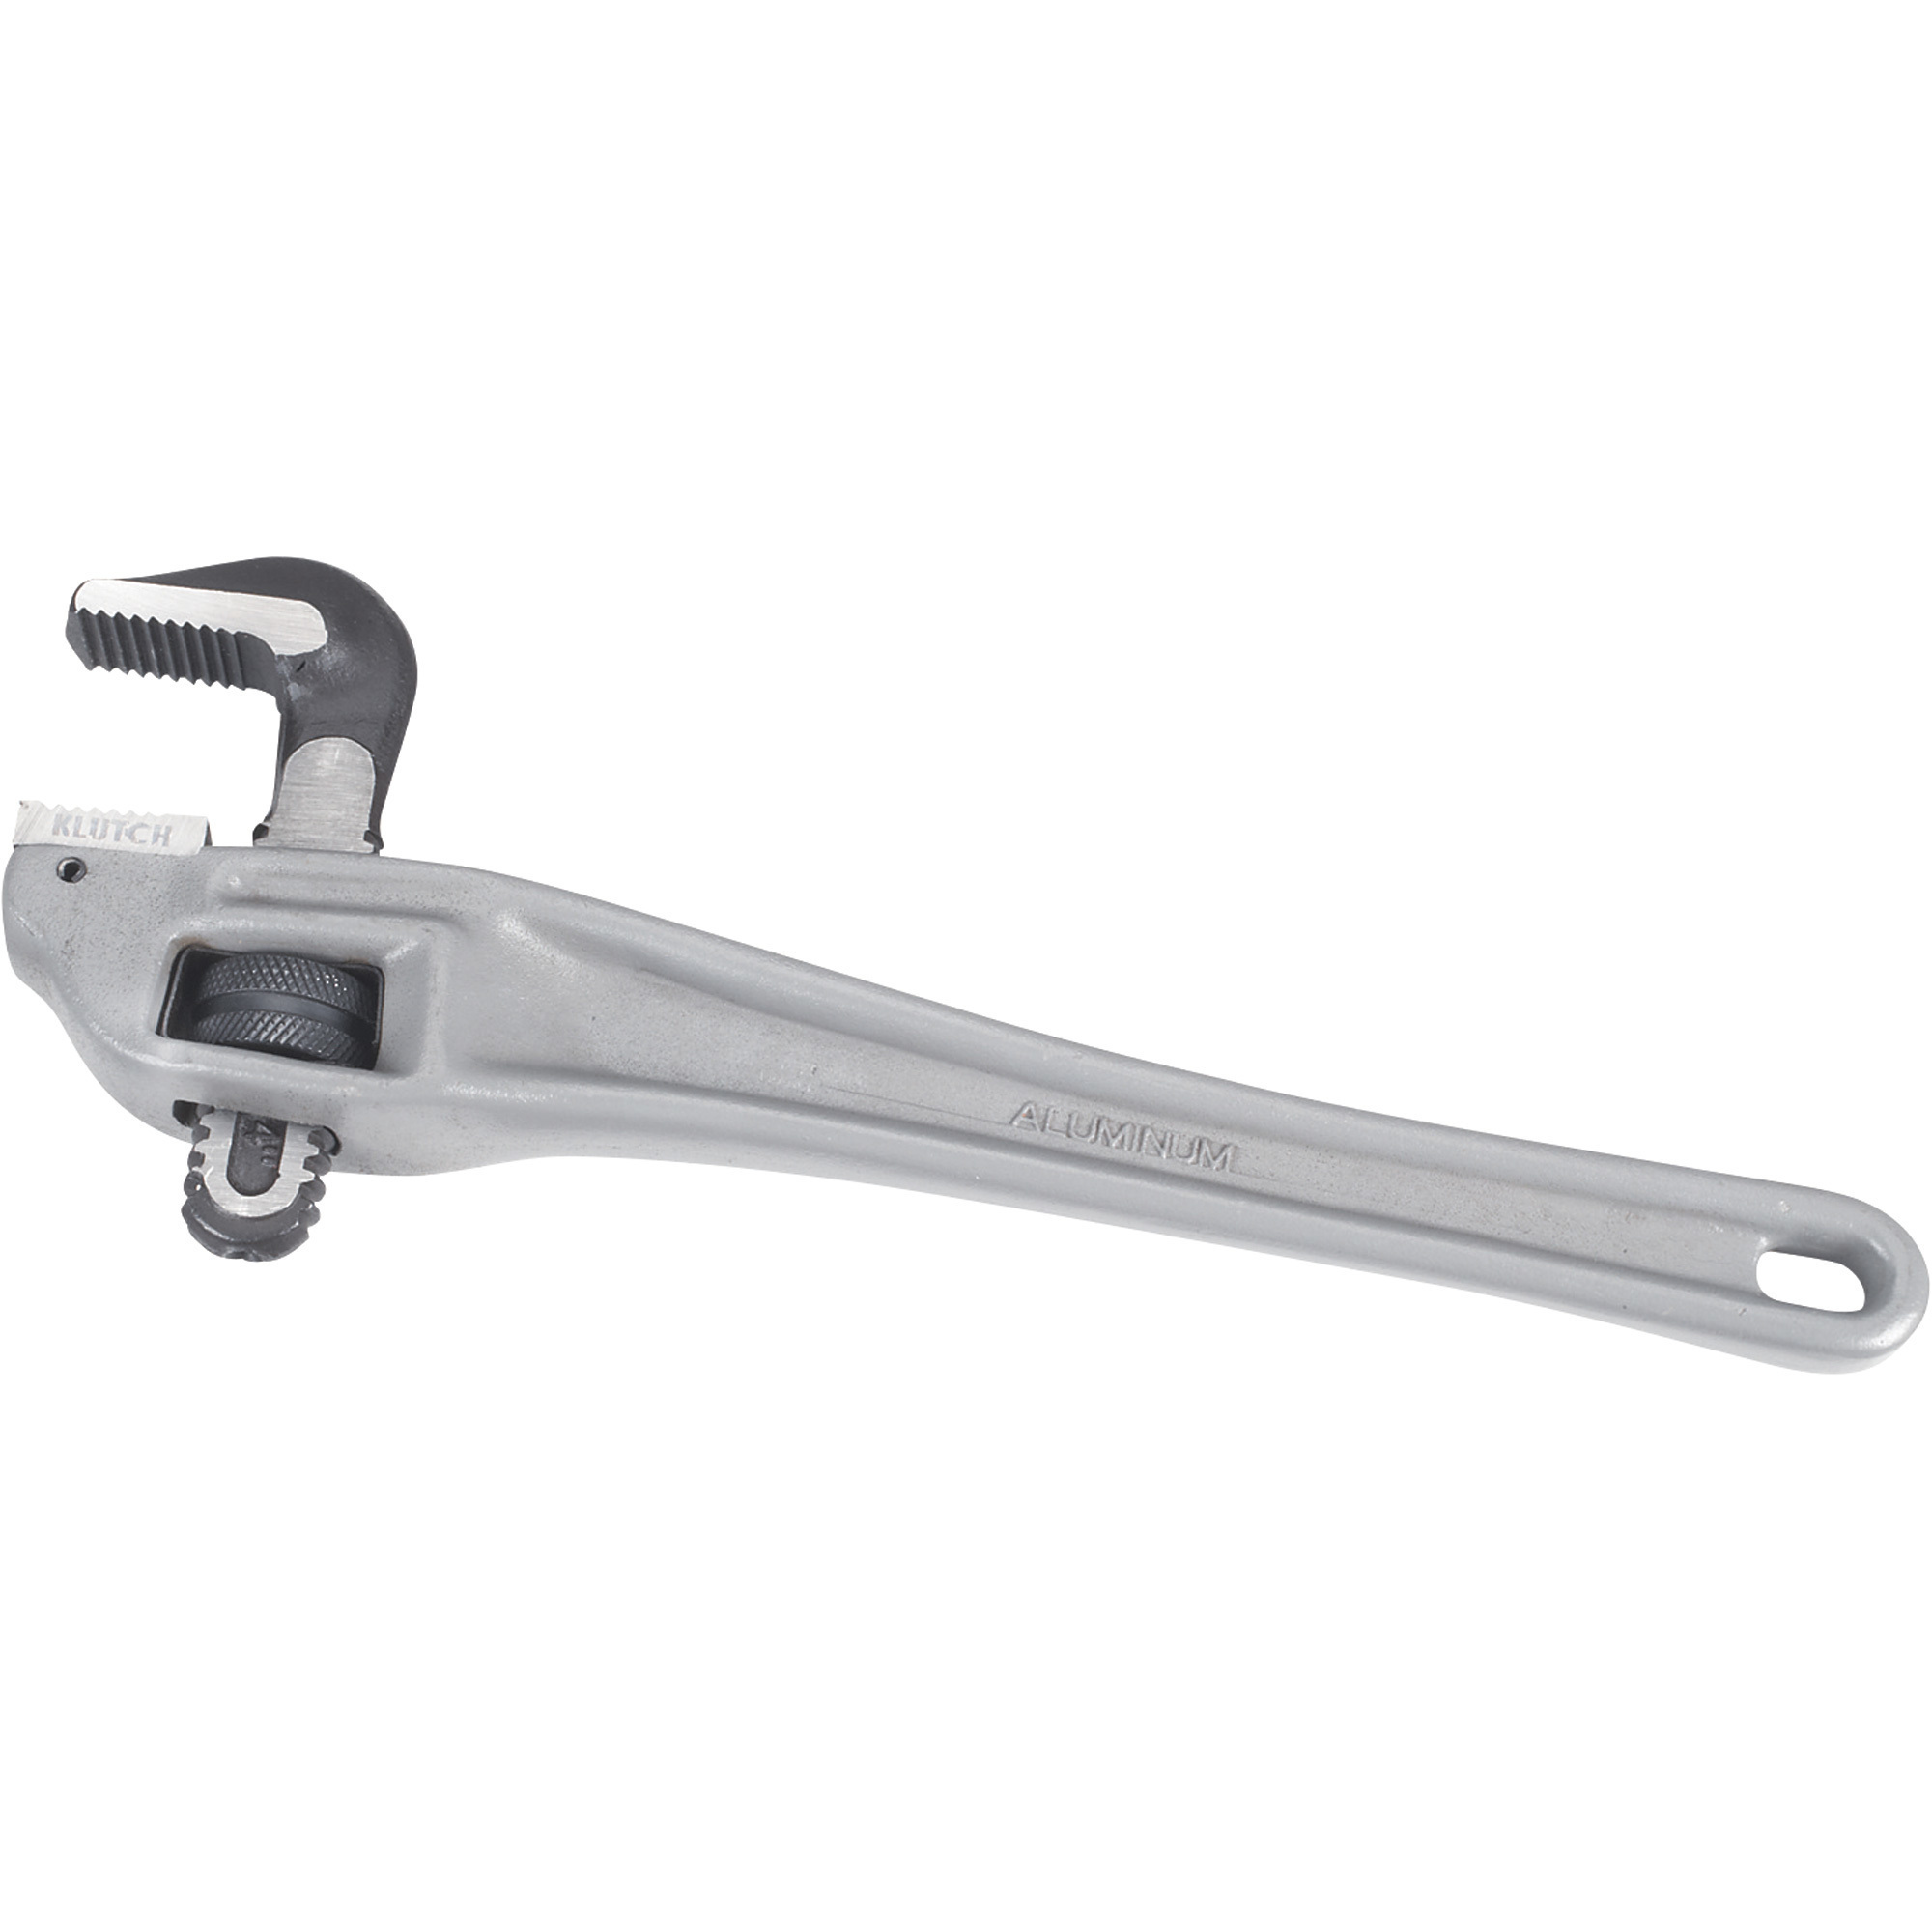 Klutch Aluminum Pipe Wrench, 24Inch